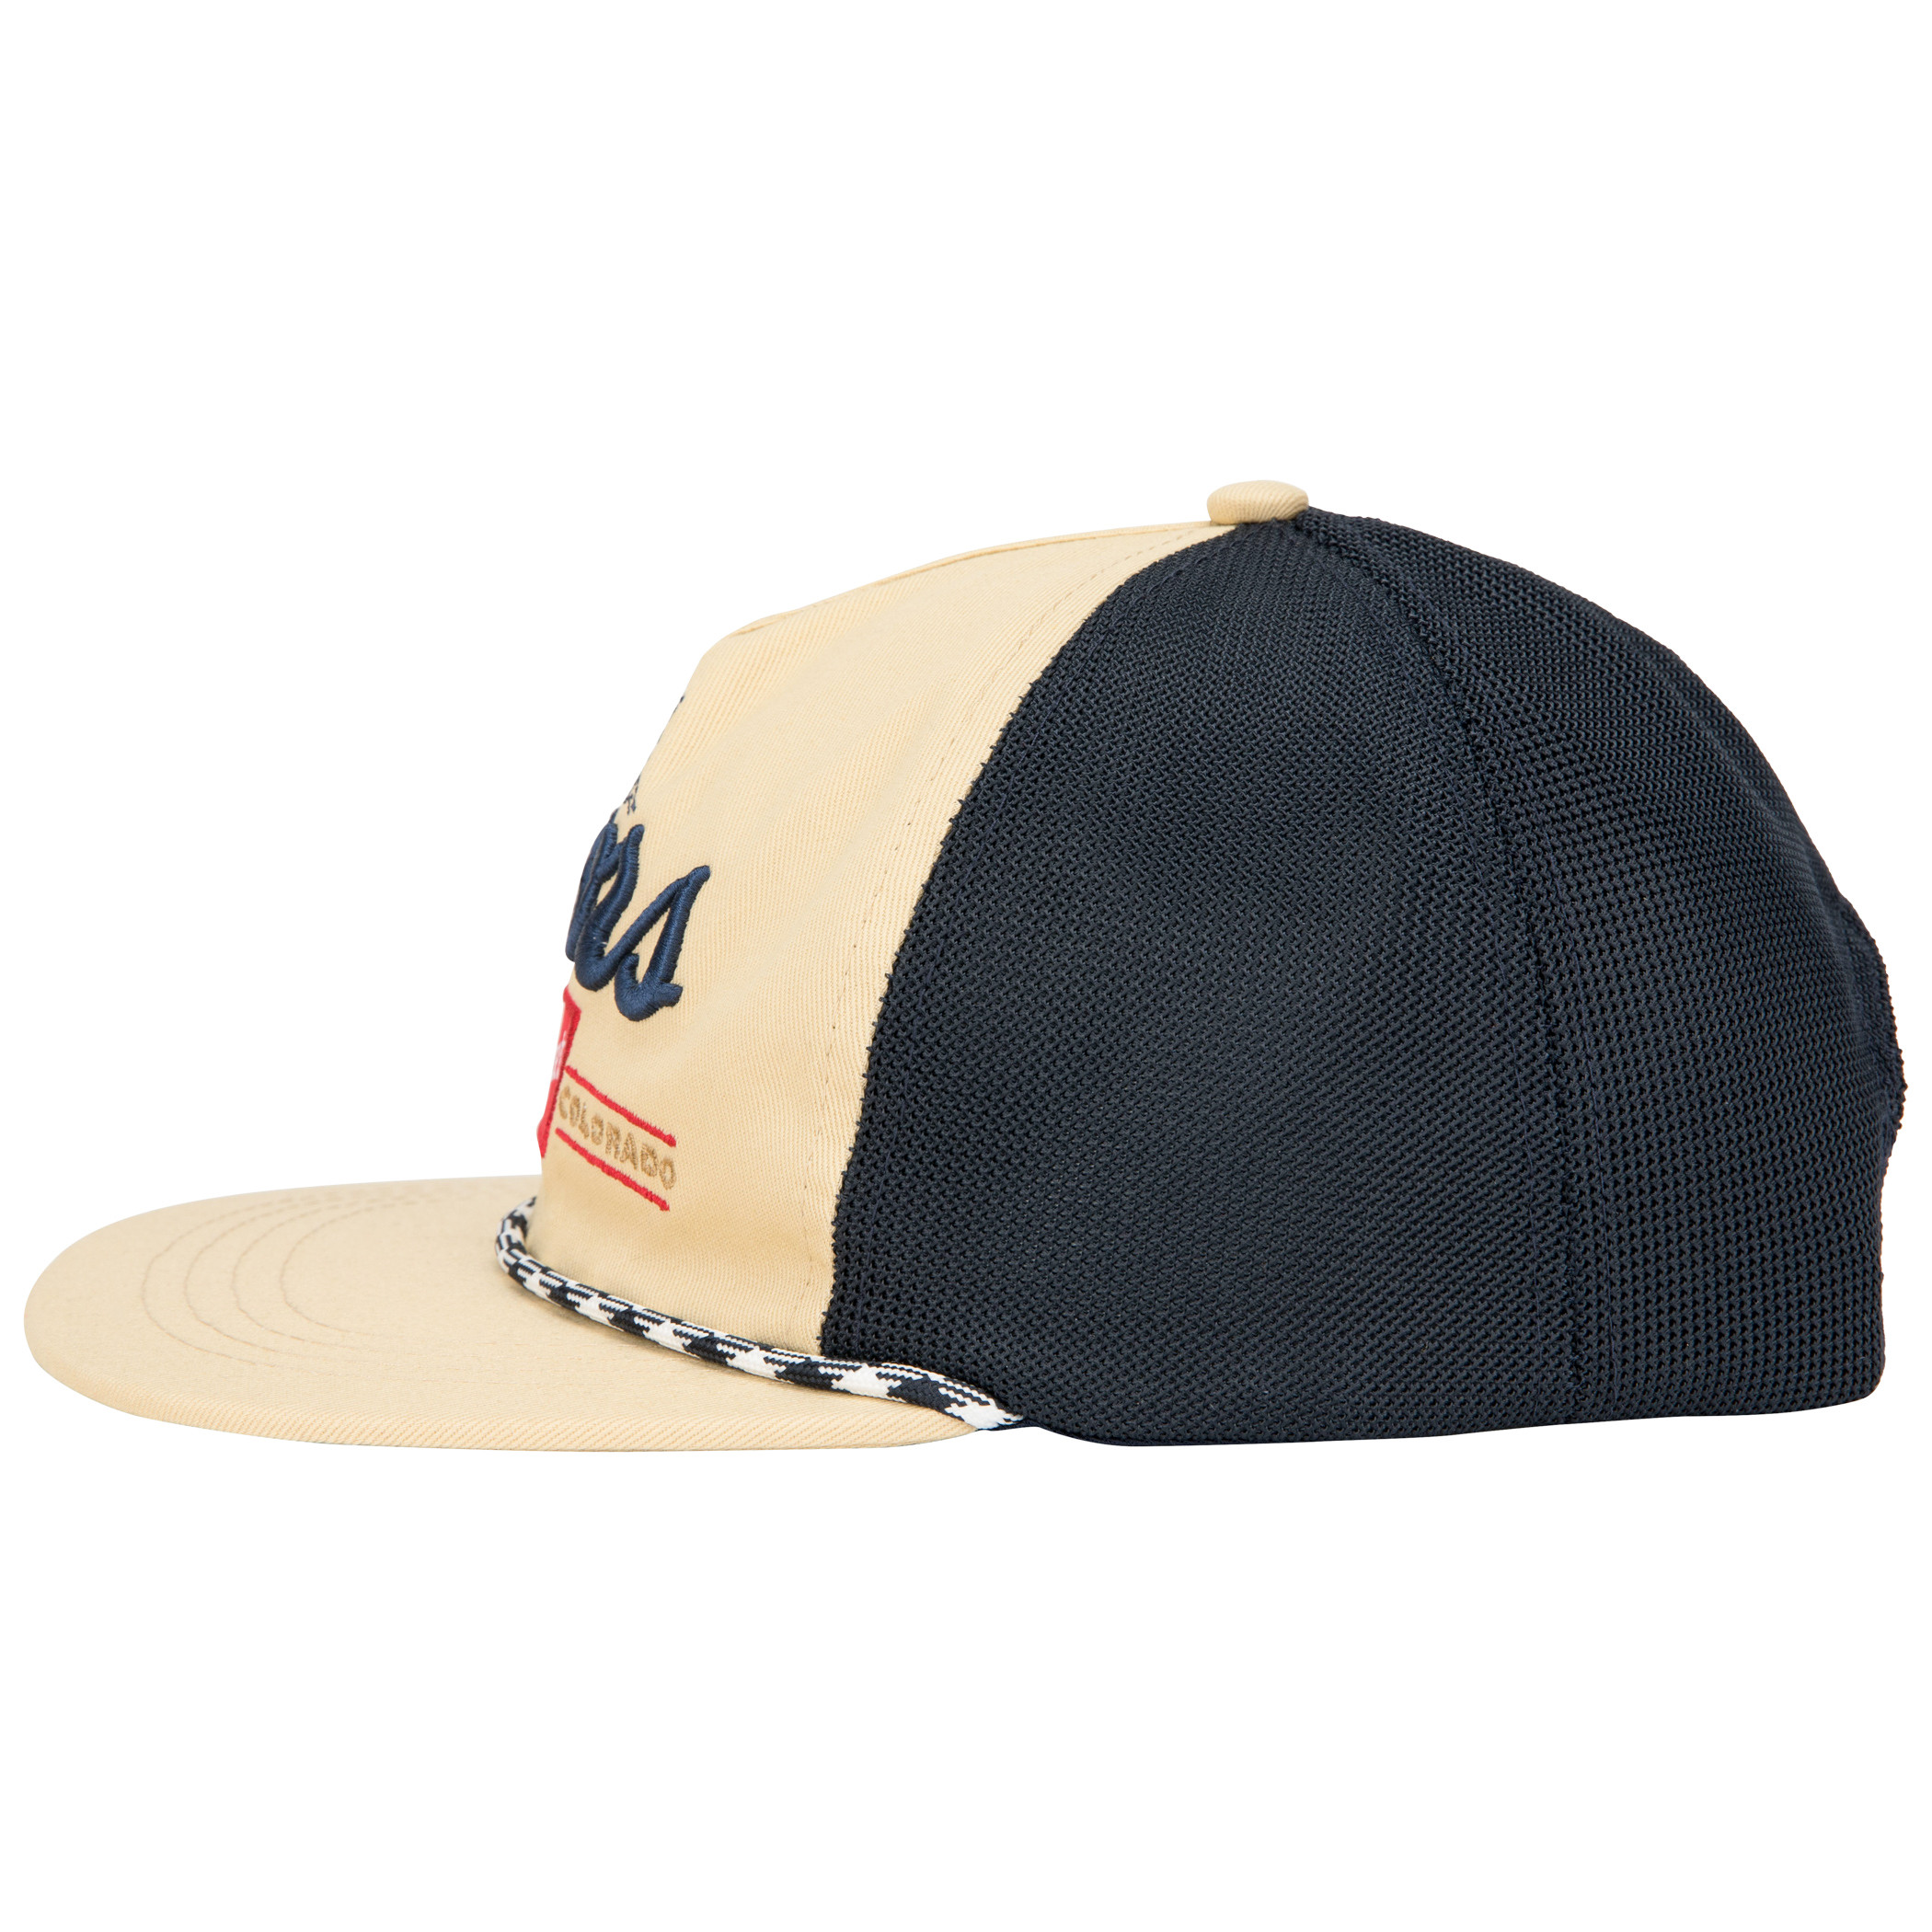 Coors Golden Banquet Plateau Snapback Rope Hat